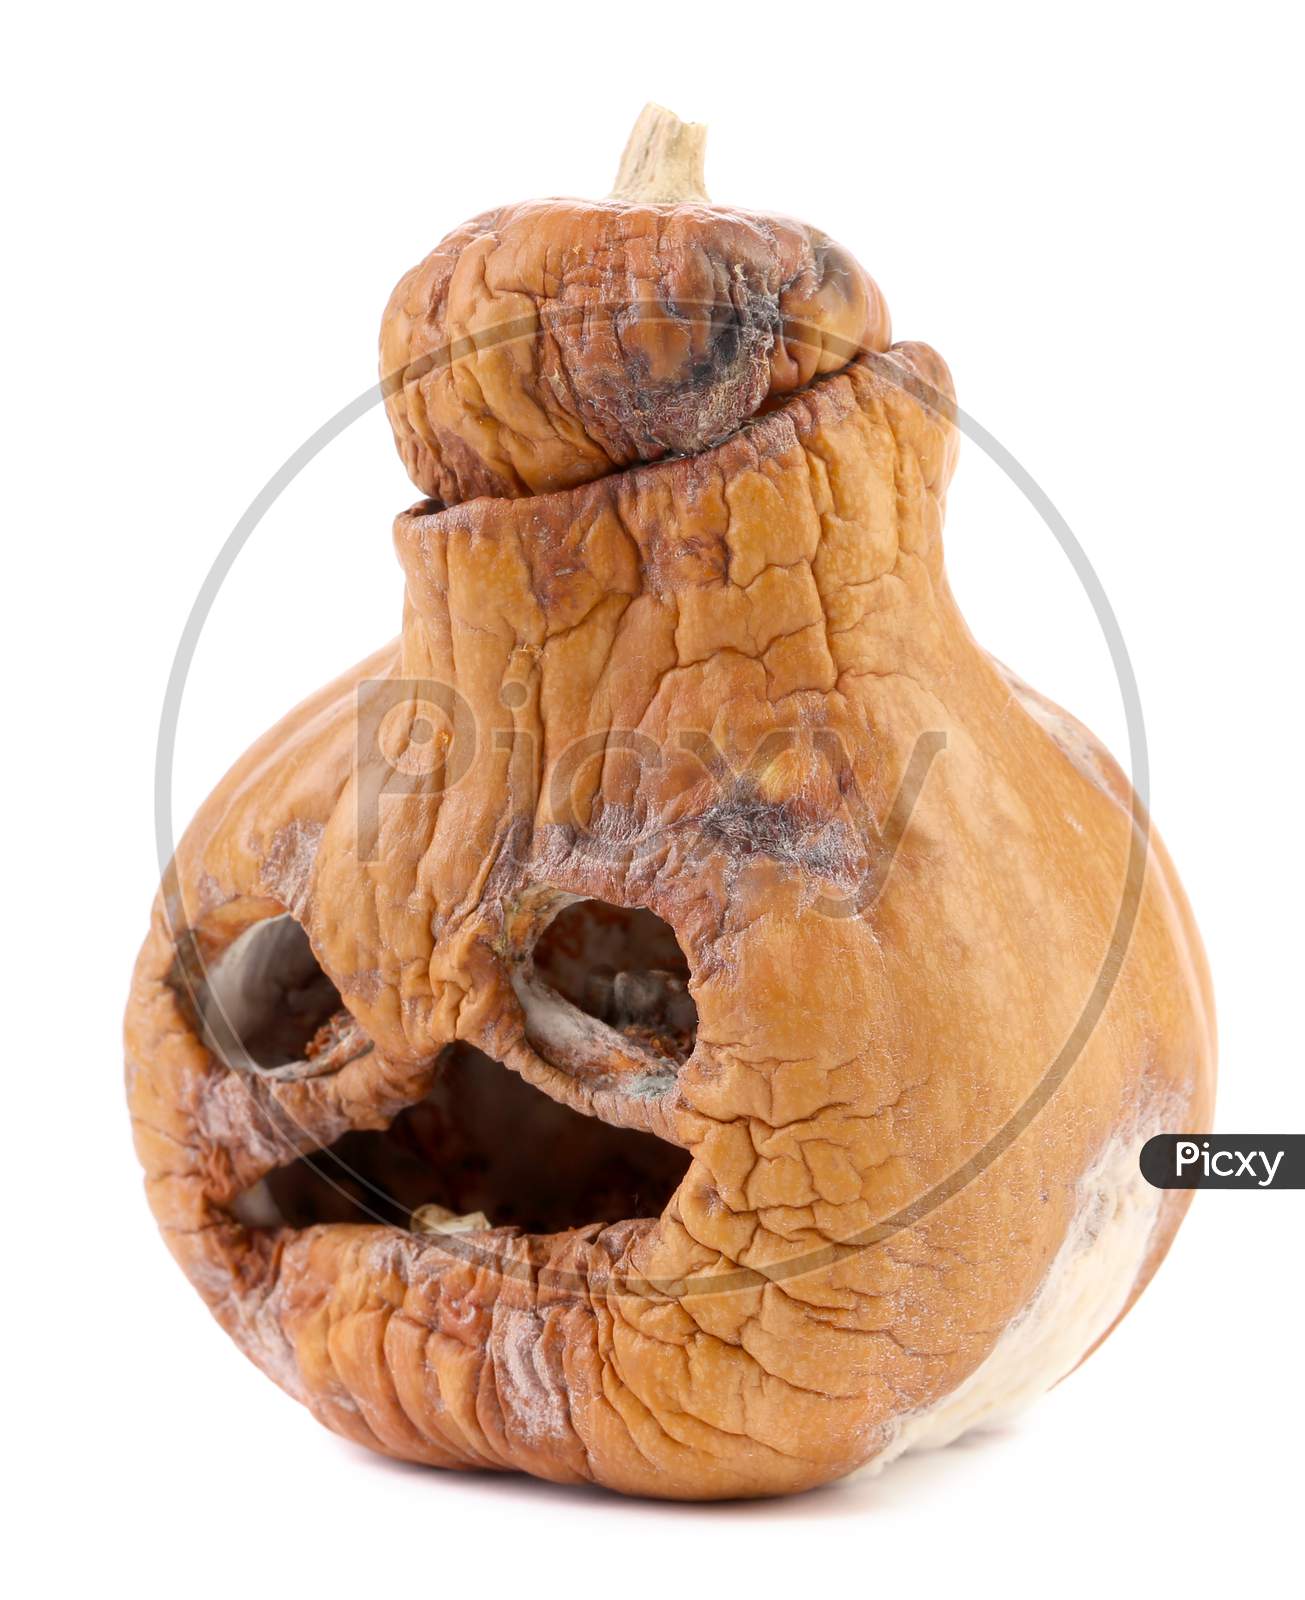 Old Halloween Pumpkin. Isolated On A White Background.